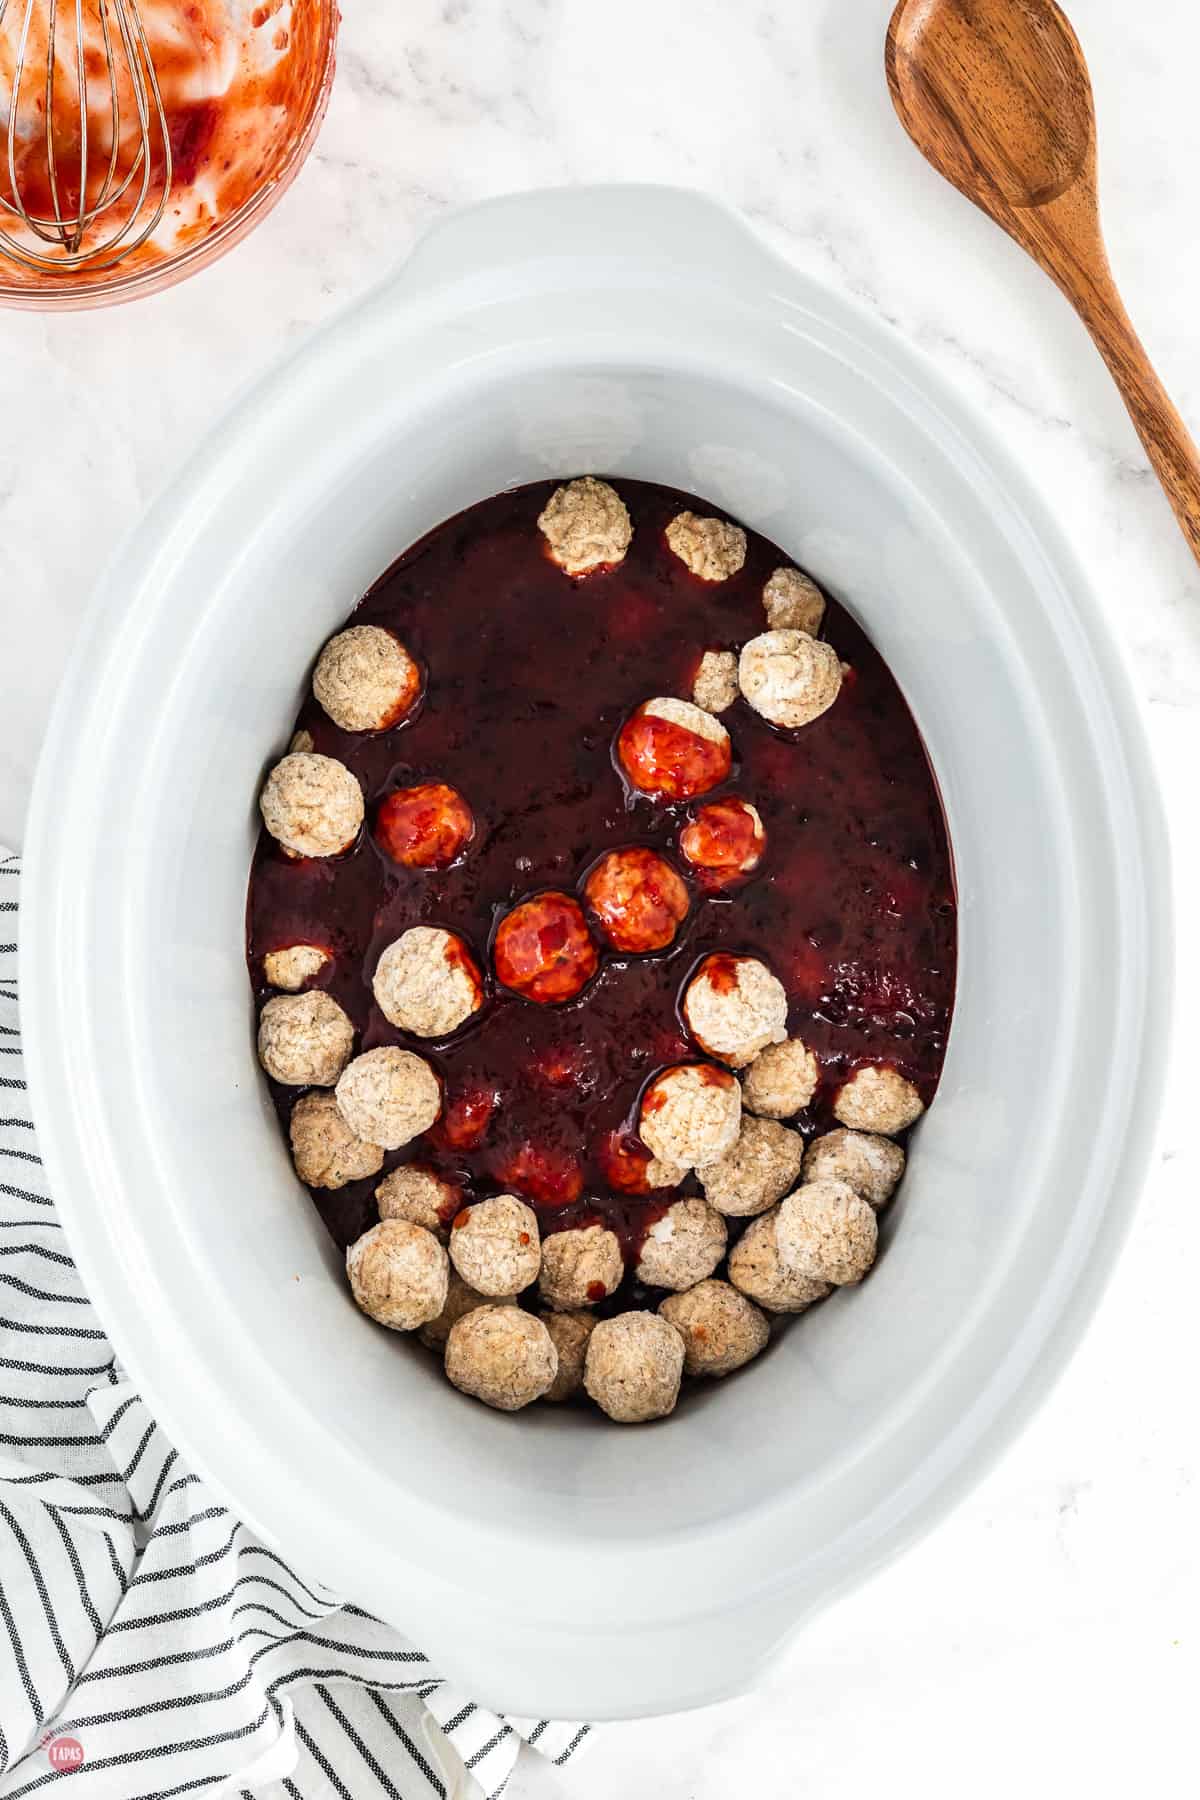 meatballs and sauce in a crockpot